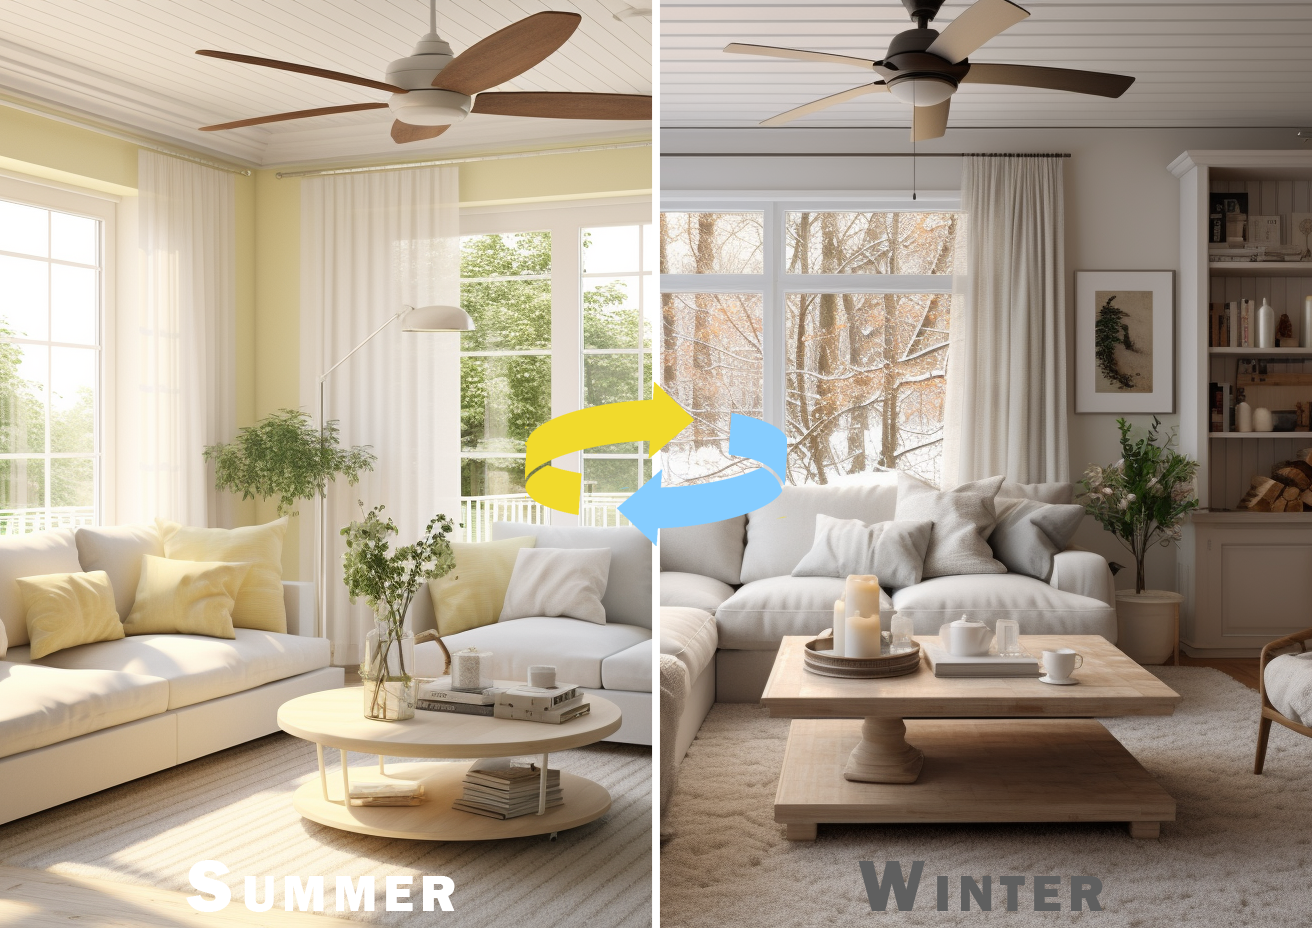 What Direction Should Your Ceiling Fan